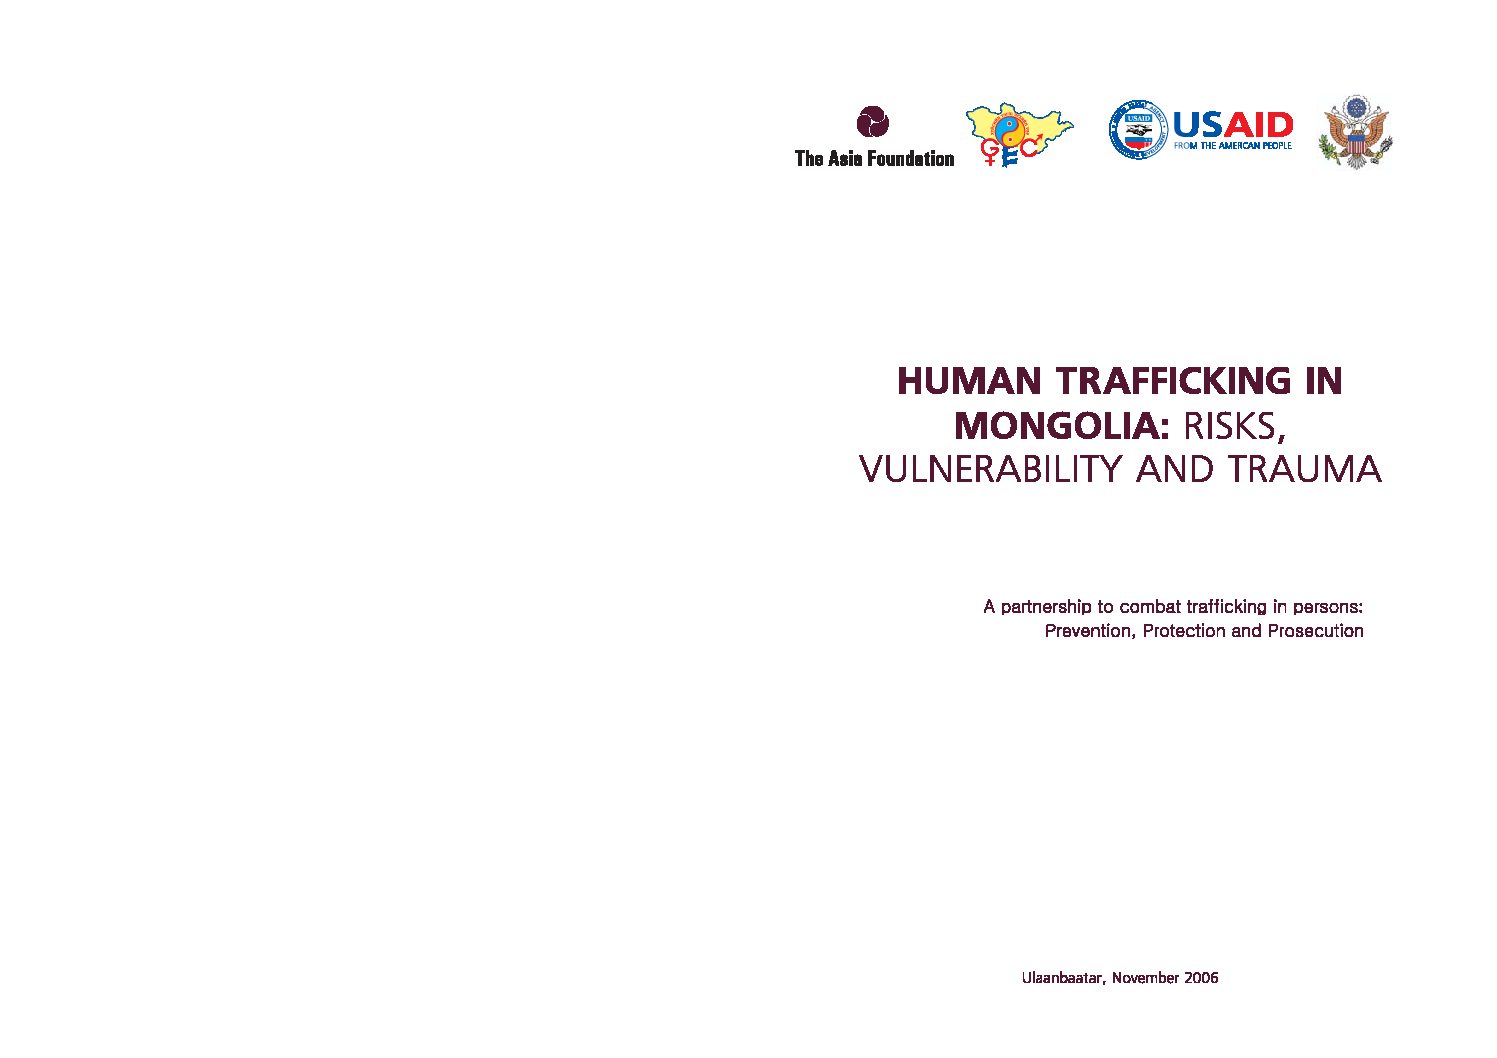 Human Trafficking in Mongolia: Risks, Vulnerability, and Trauma